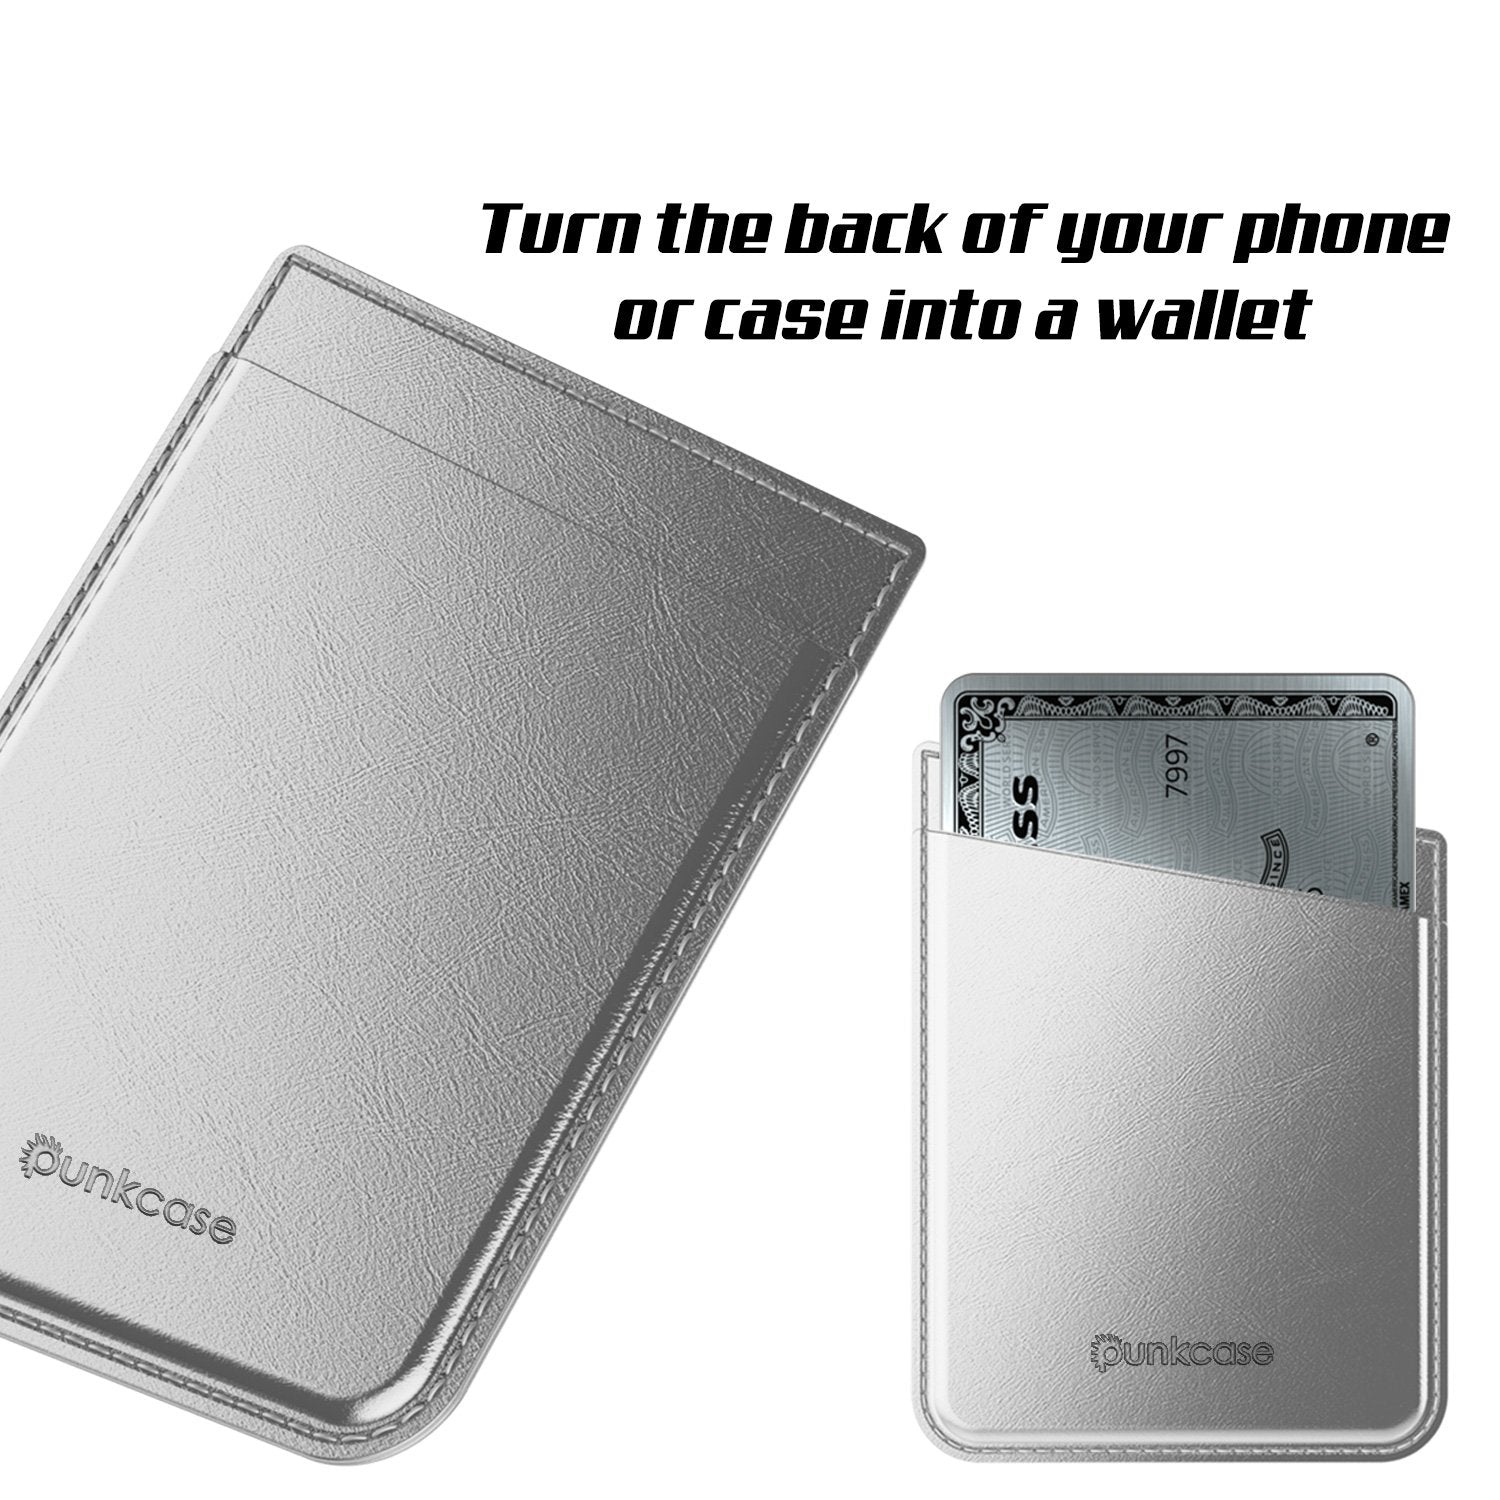 PunkCase CardStud Deluxe Stick On Wallet | Adhesive Card Holder Attachment for Back of iPhone, Android & More | Leather Pouch | [Silver]